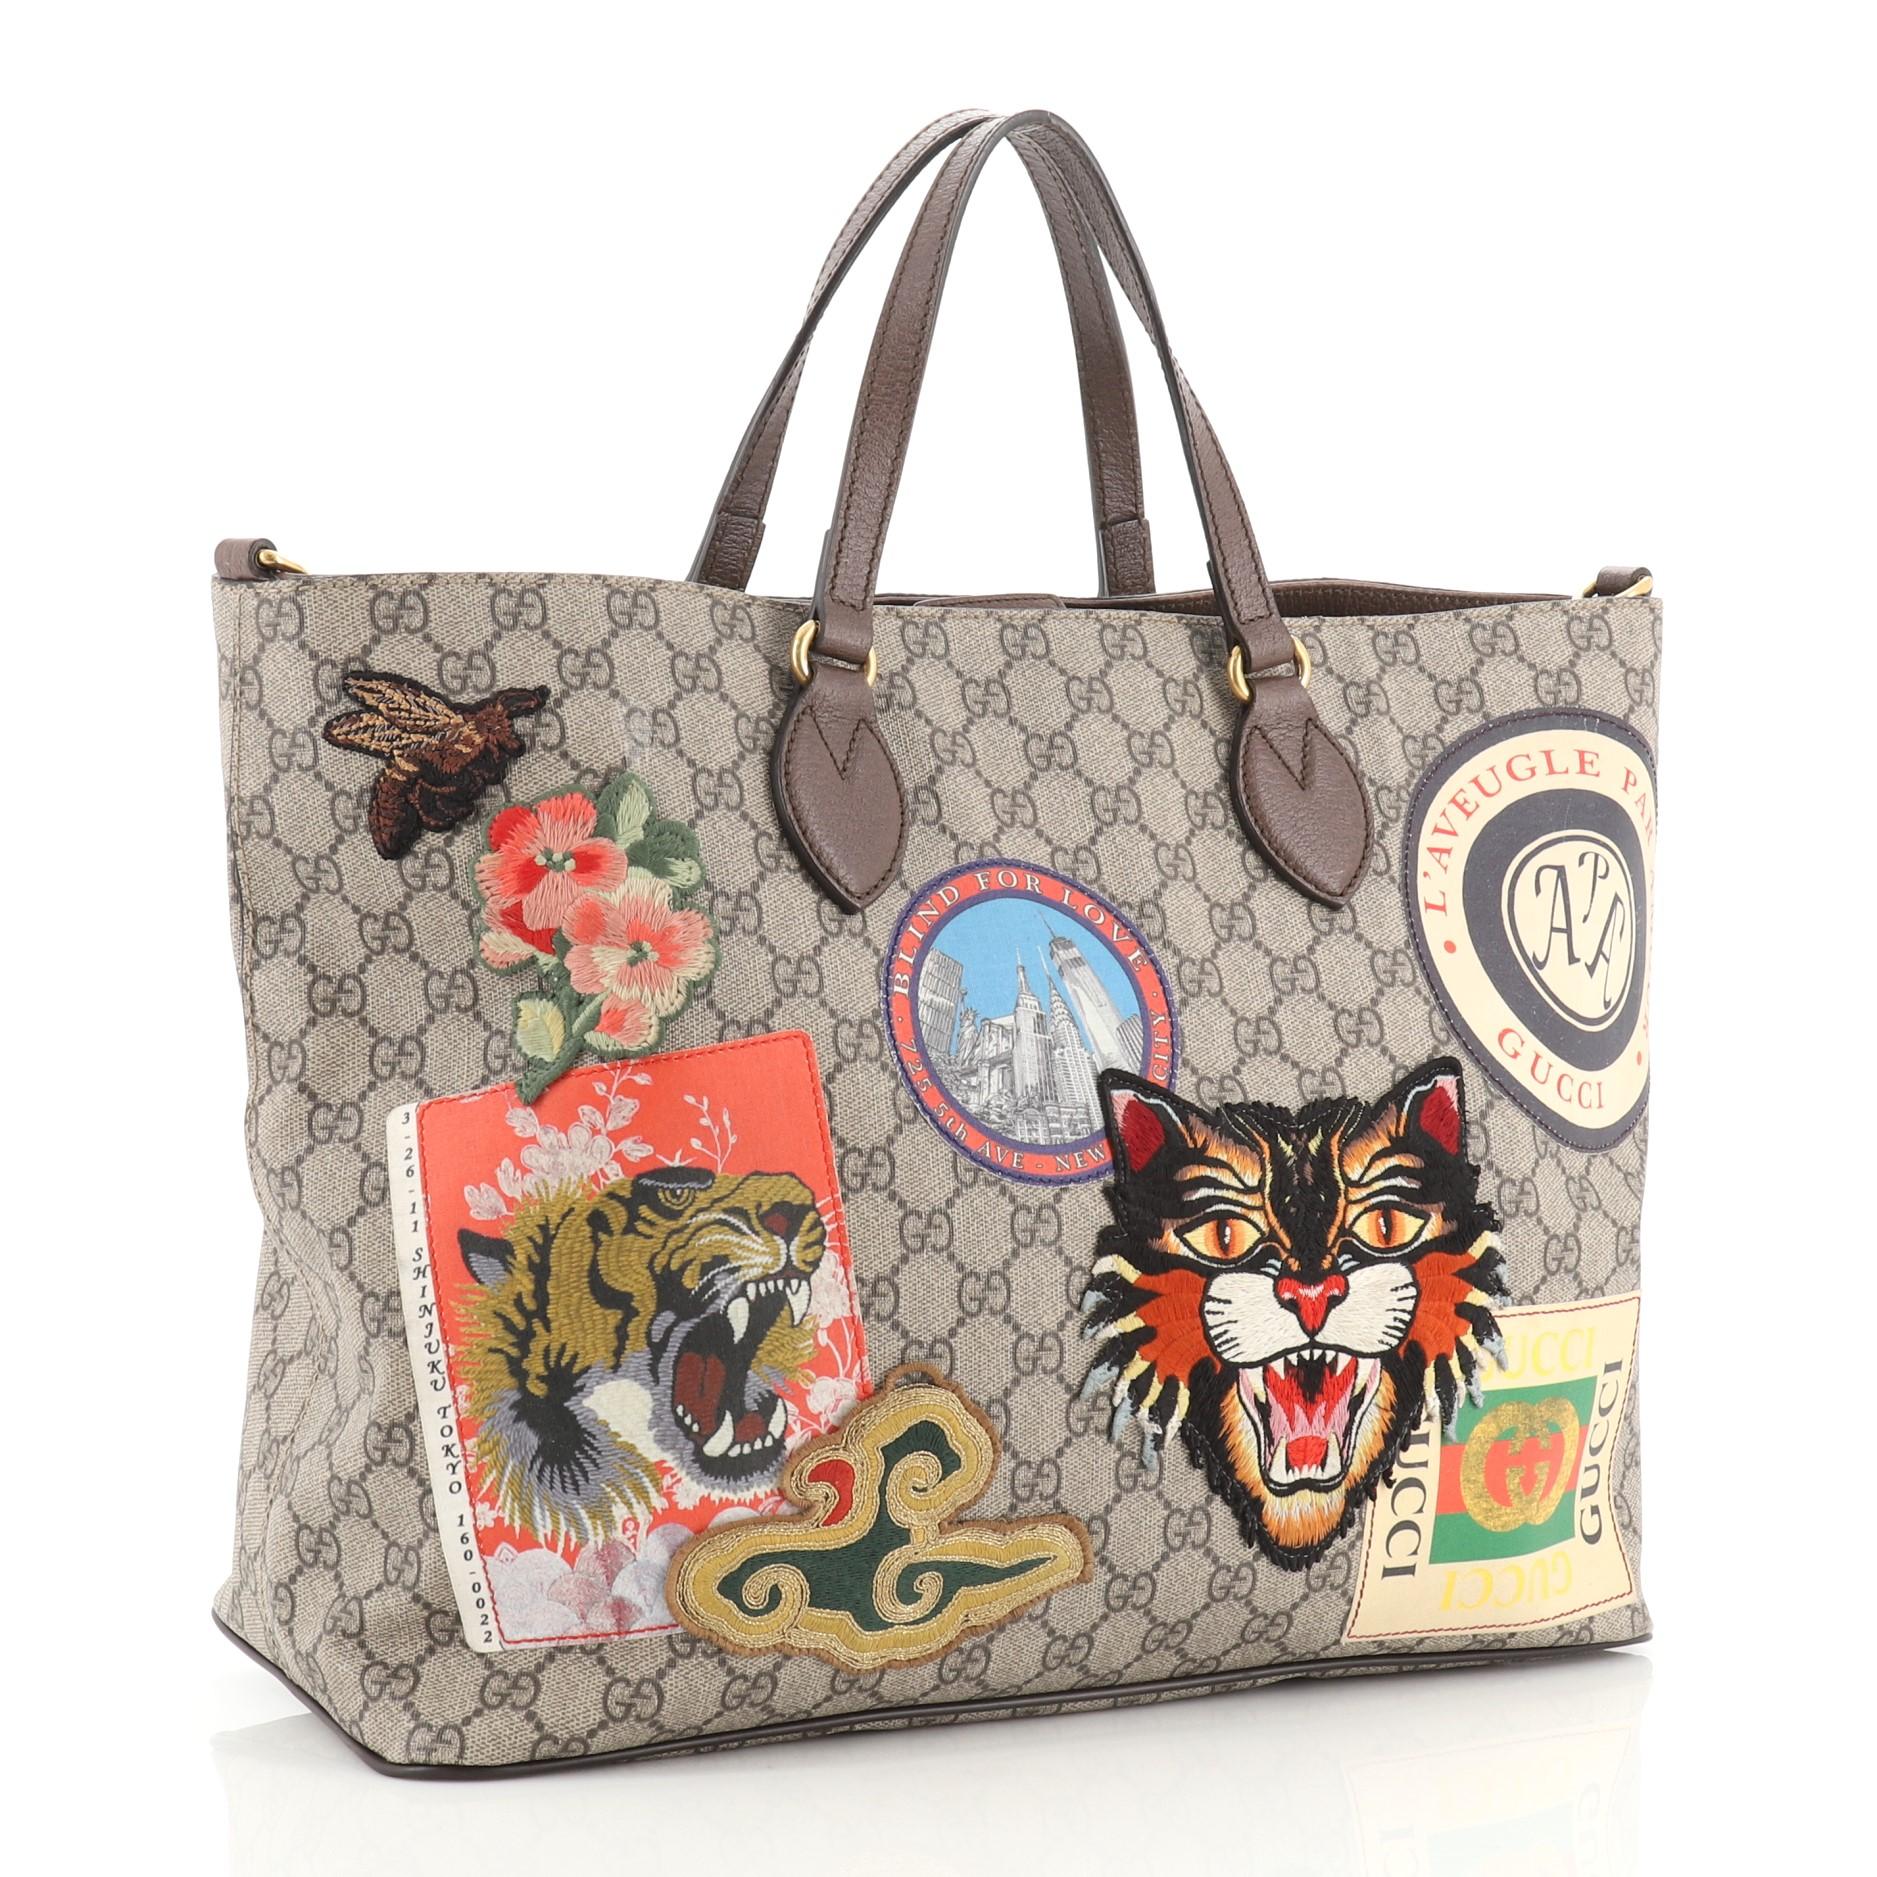 This Gucci Courrier Convertible Soft Open Tote GG Coated Canvas with Applique Large, crafted in brown GG coated canvas, features dual flat leather handles, embroidered appliques, and aged gold-tone hardware. Its magnetic closure opens to a neutral